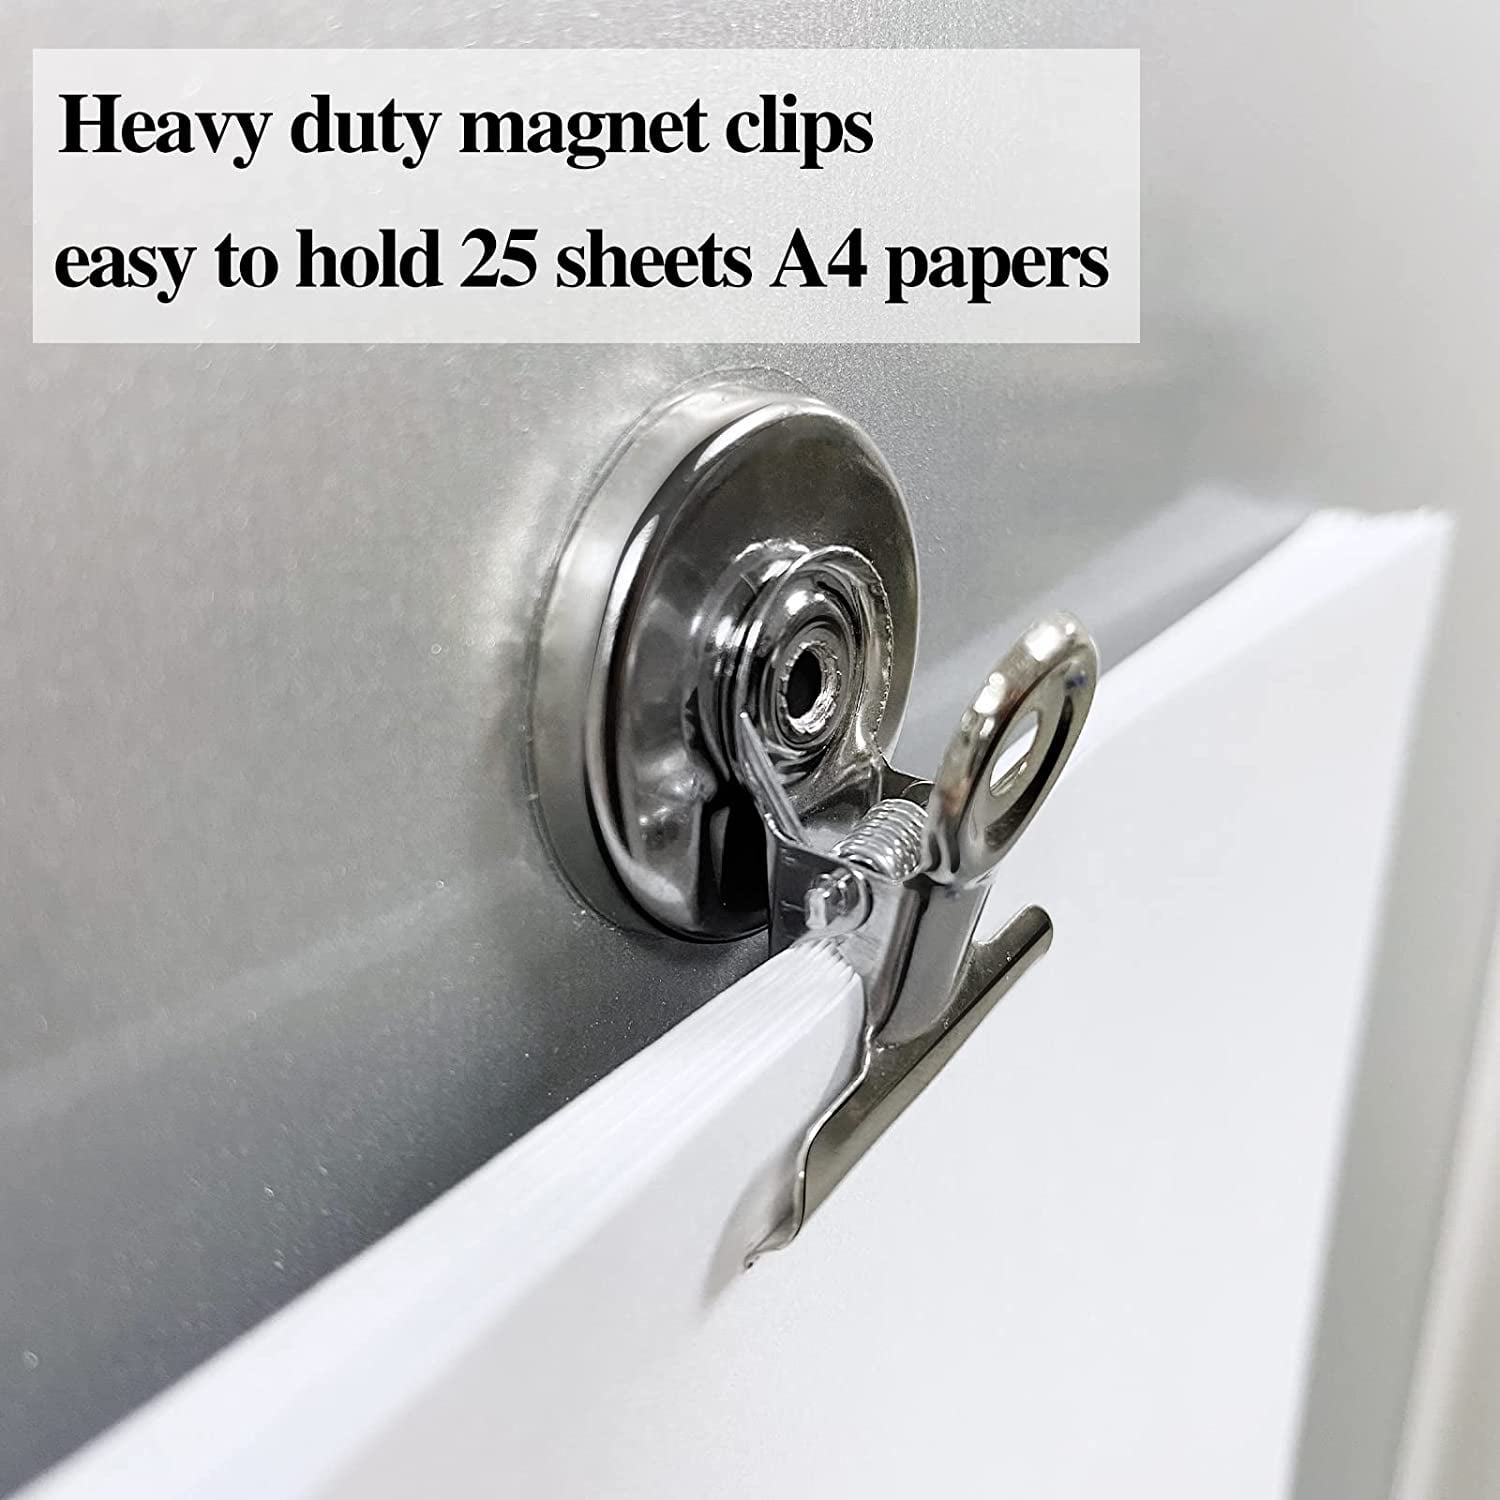  DIYSELF 24 Pack Fridge Magnet, Magnetic Clips Heavy Duty, Magnet  Clips for Fridge, Whiteboard, Office, Refrigerator Magnets No Scratch Clip  Magnets for Hanging Photos, Fridge Magnet Clips : Home & Kitchen